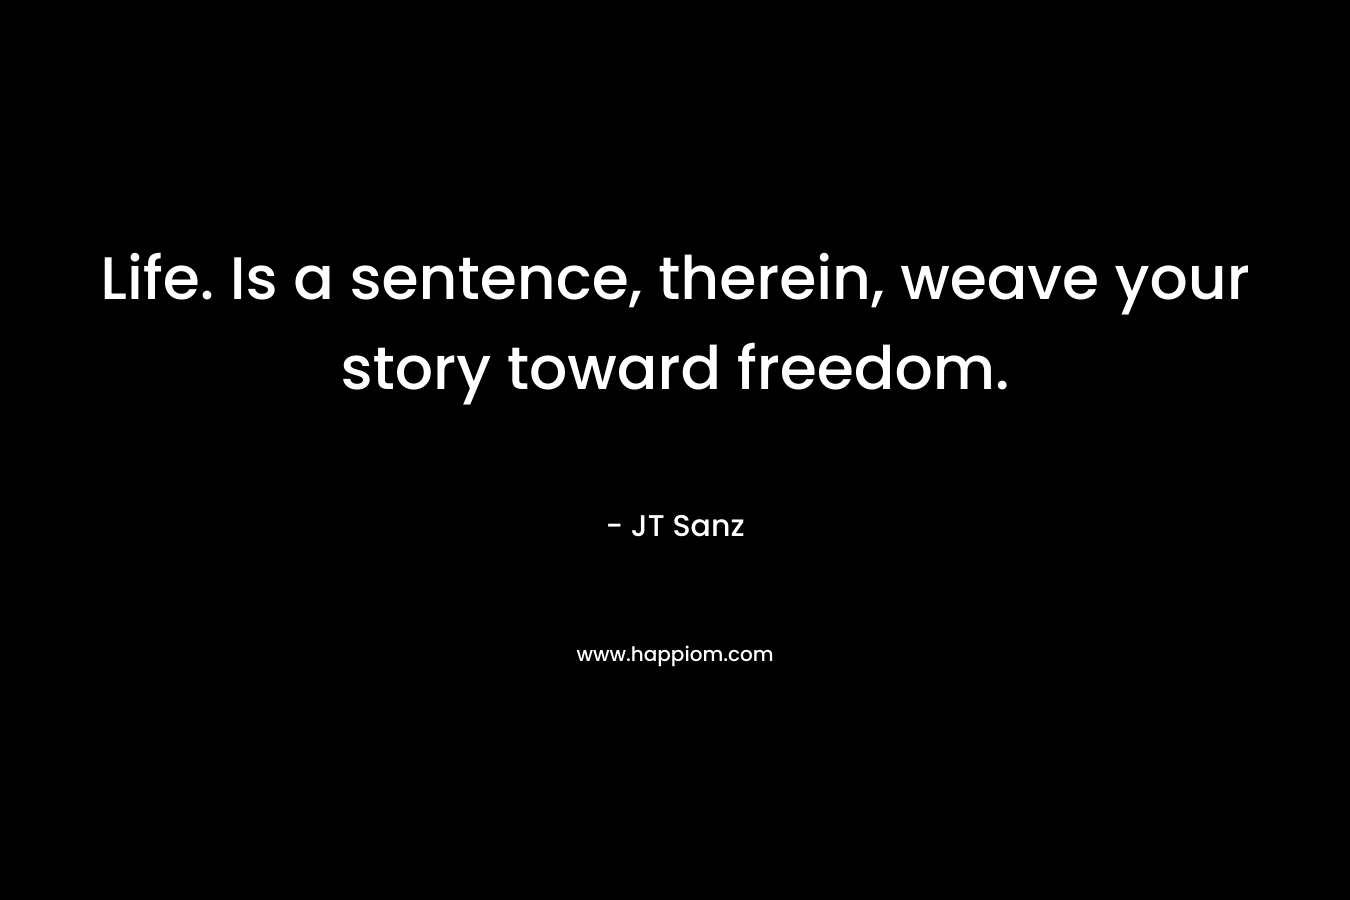 Life. Is a sentence, therein, weave your story toward freedom.